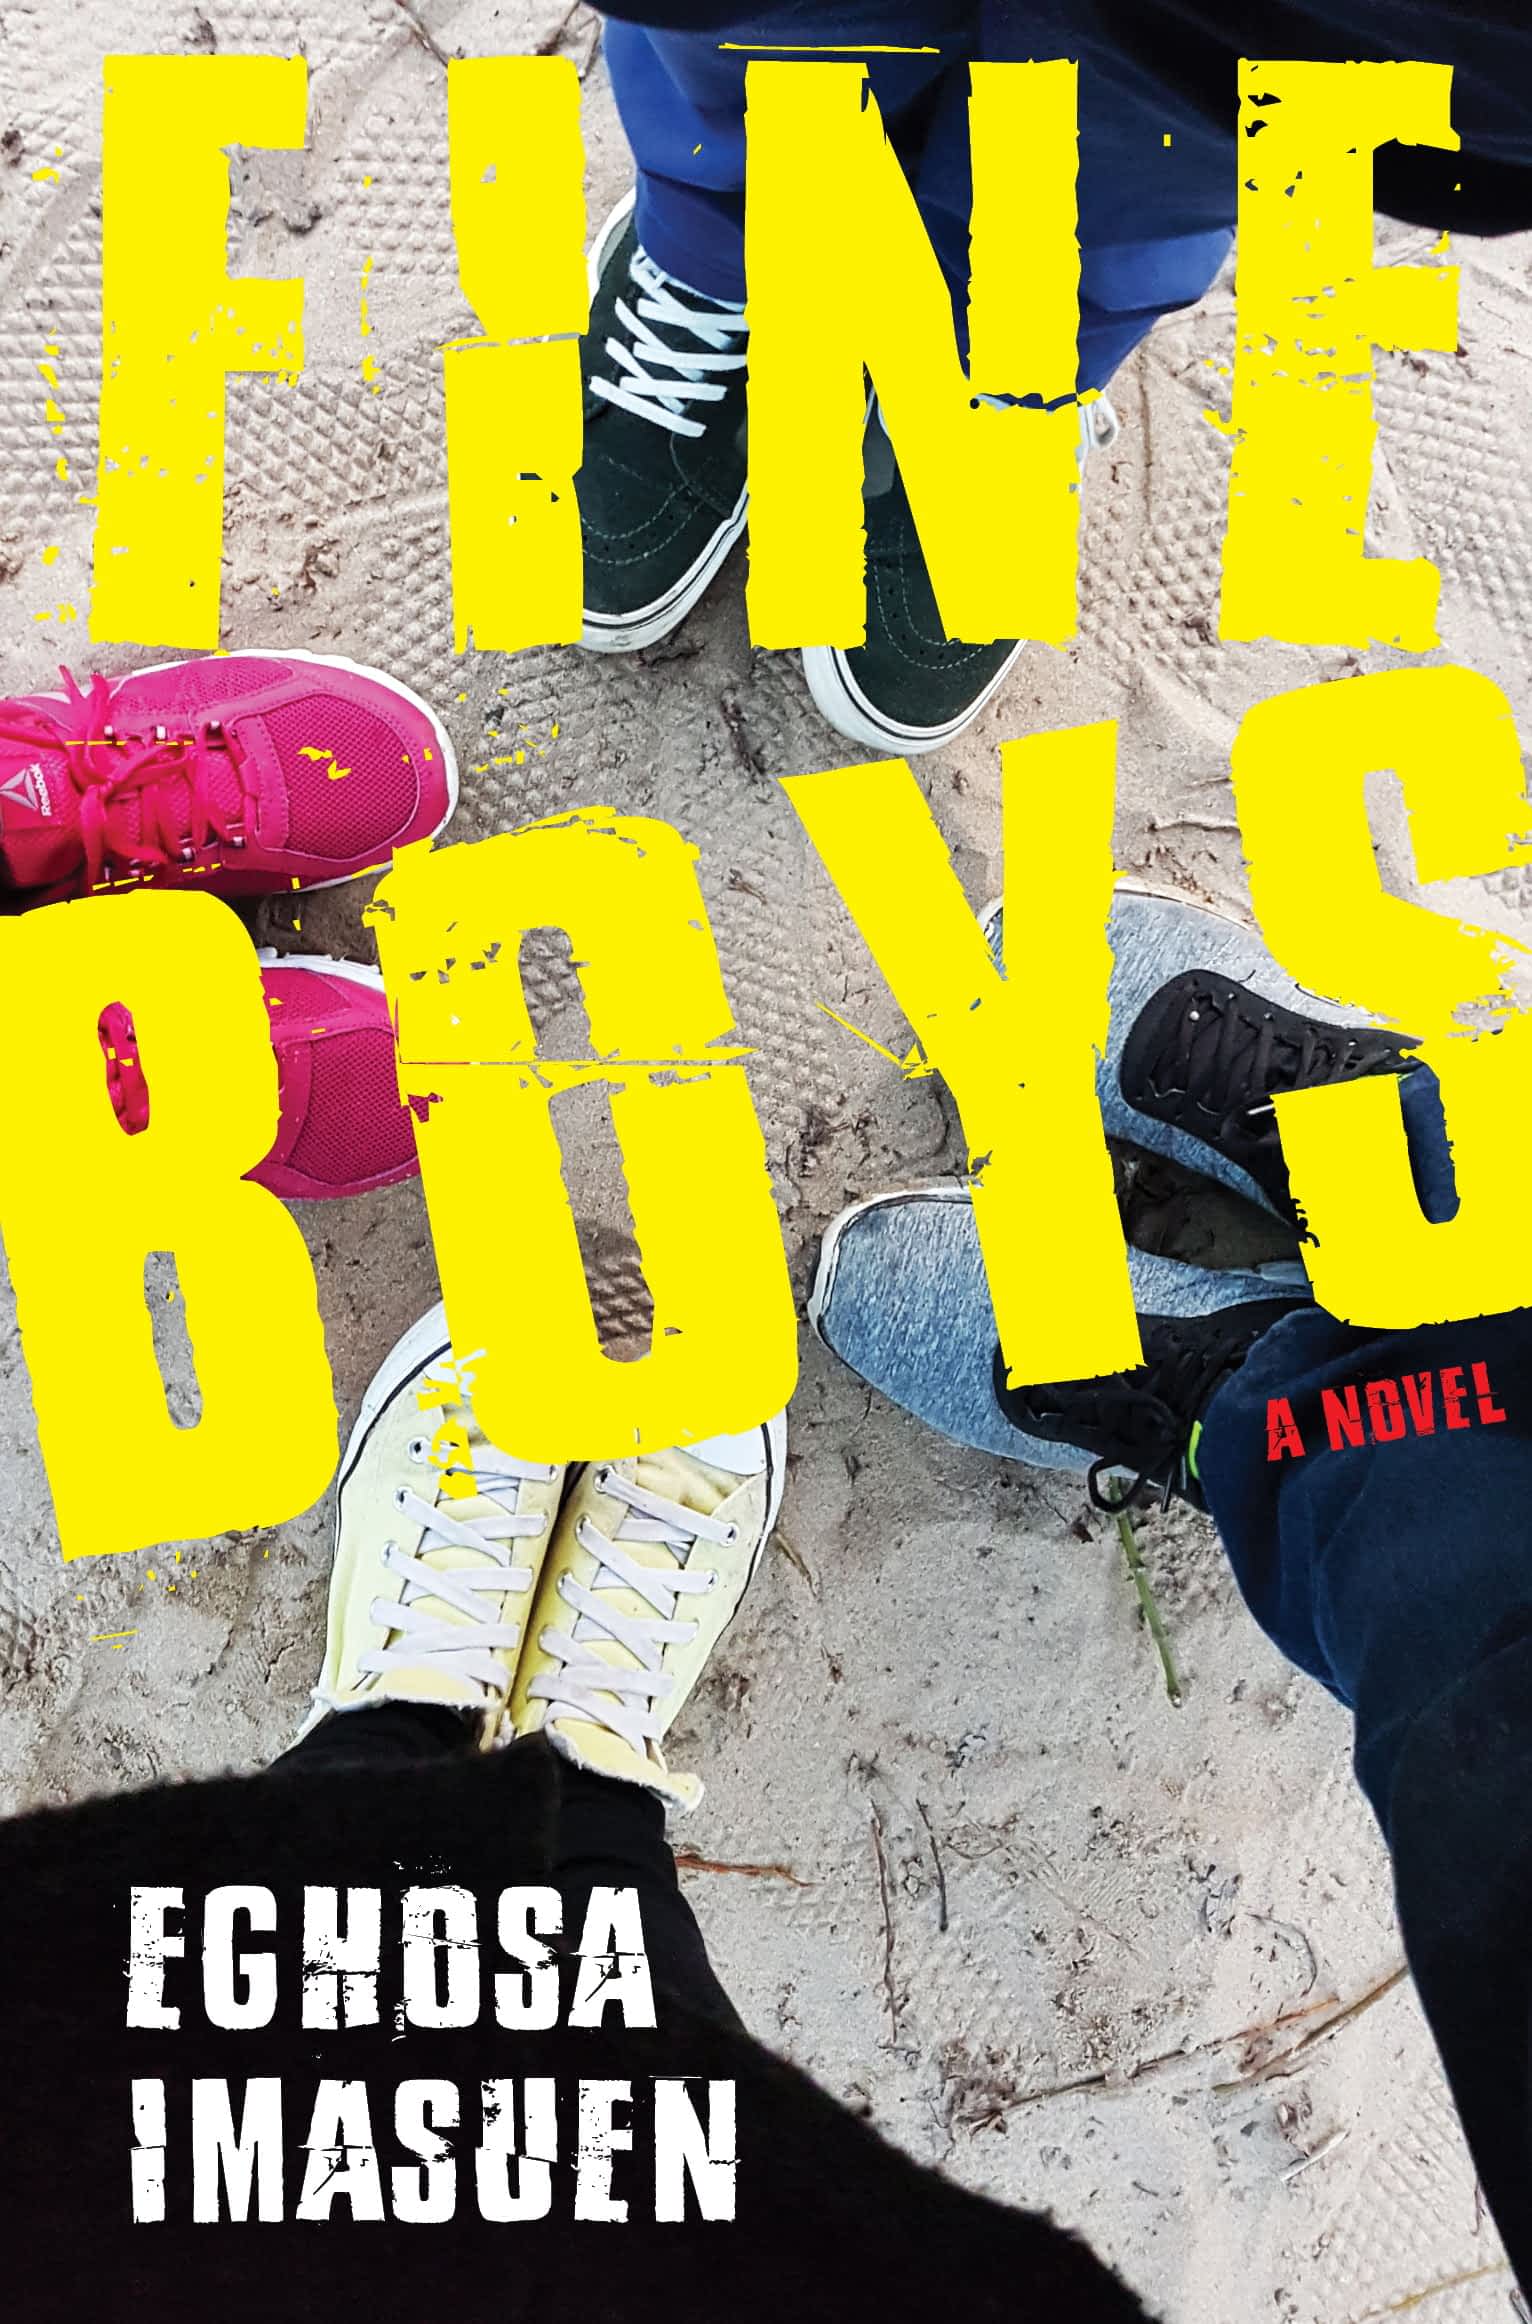 fine boys revised New Releases